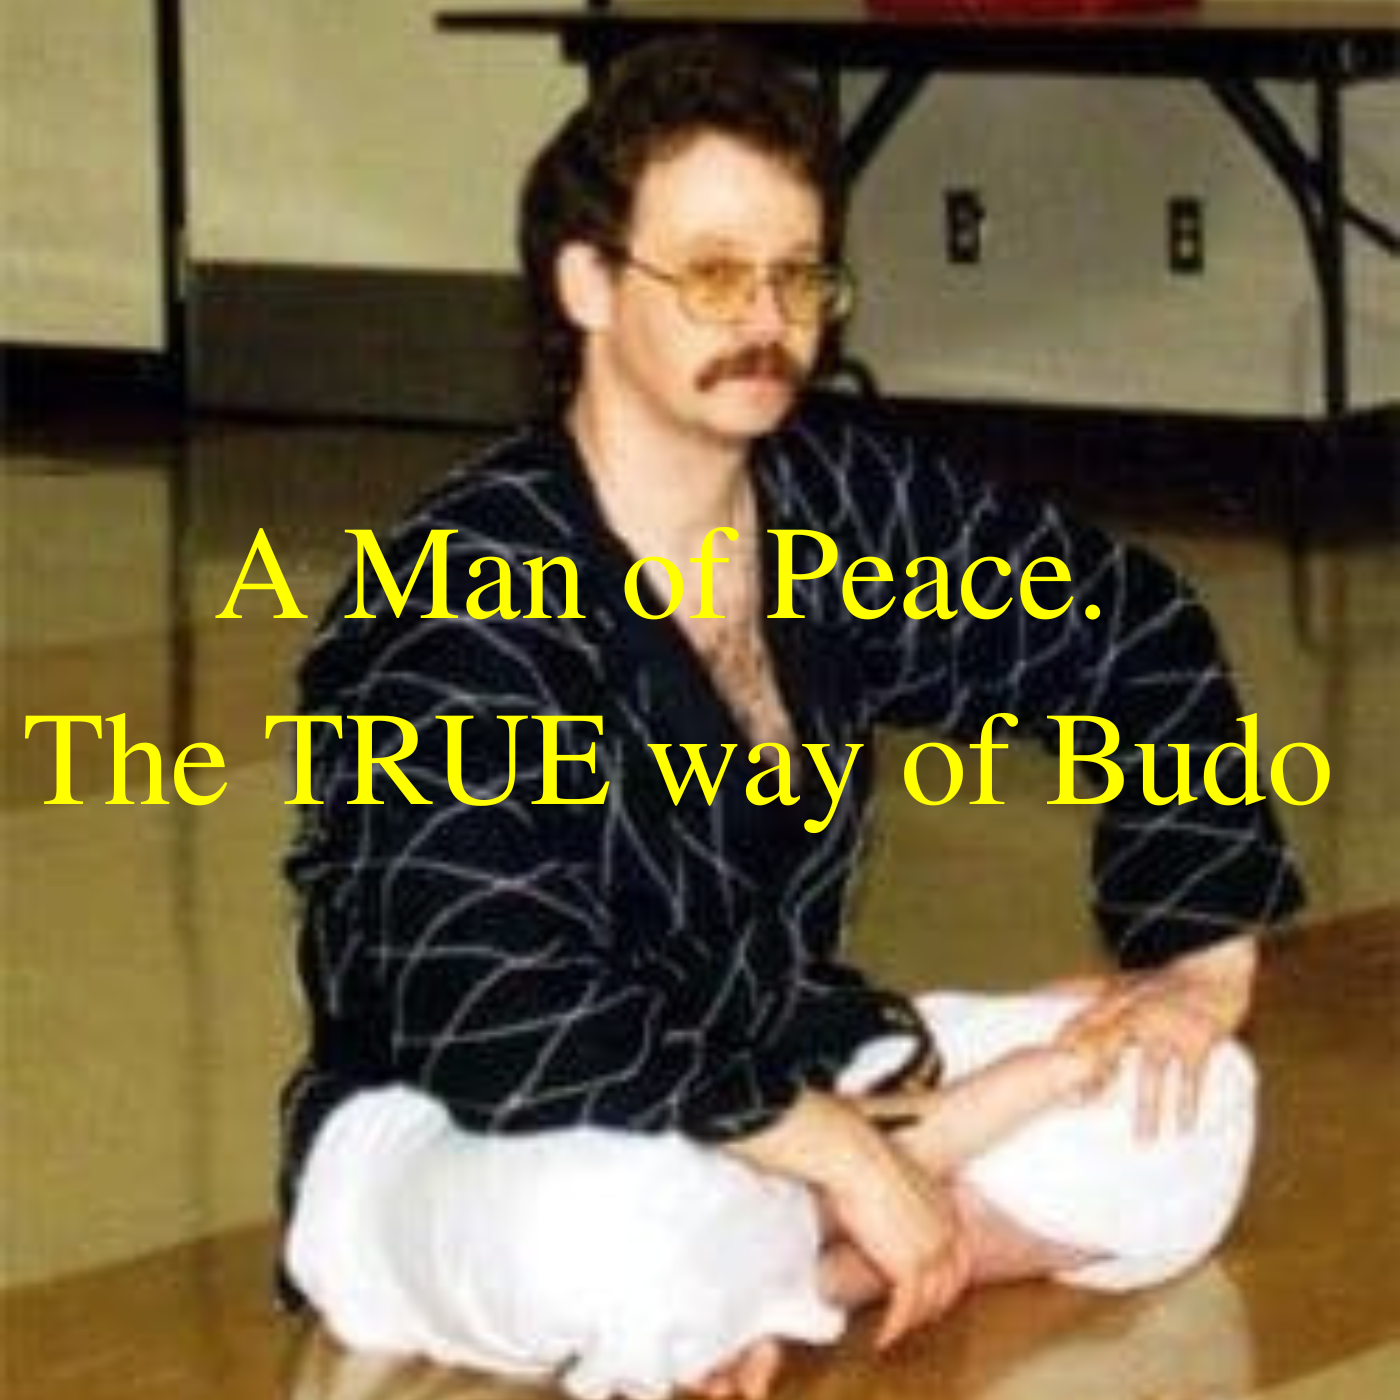 * A Man of Peace